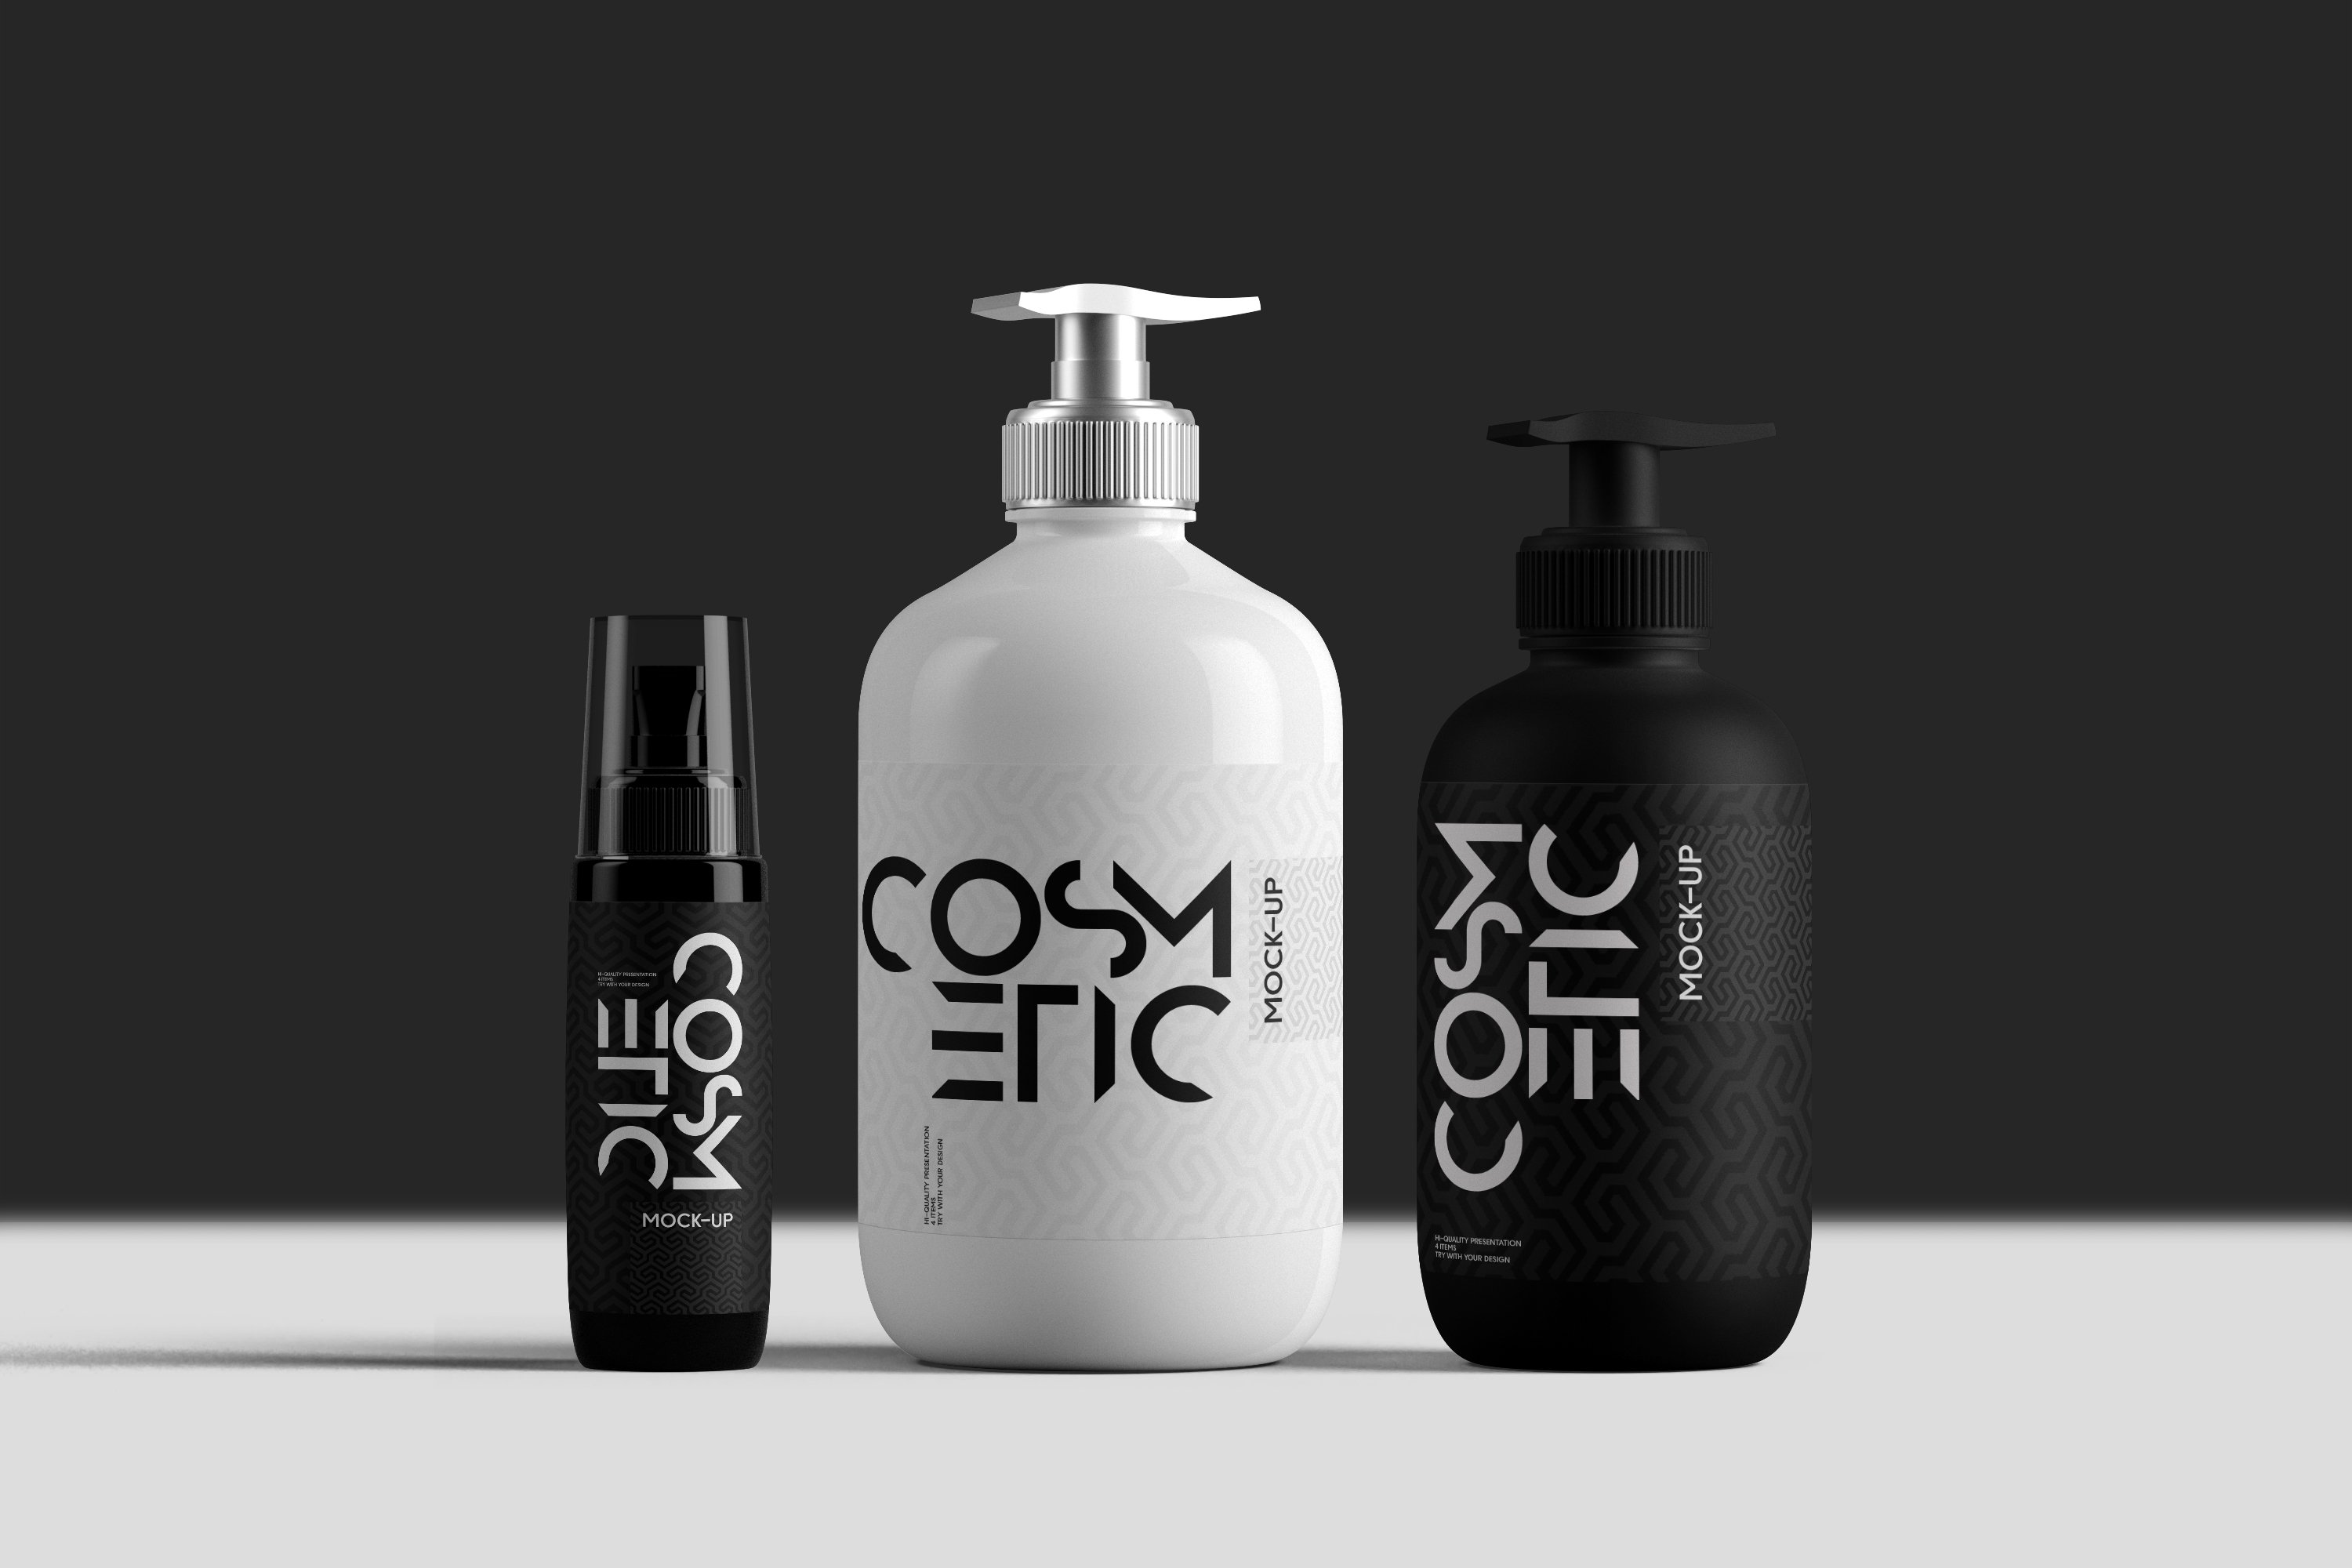 Three bottles options in black and white colors.